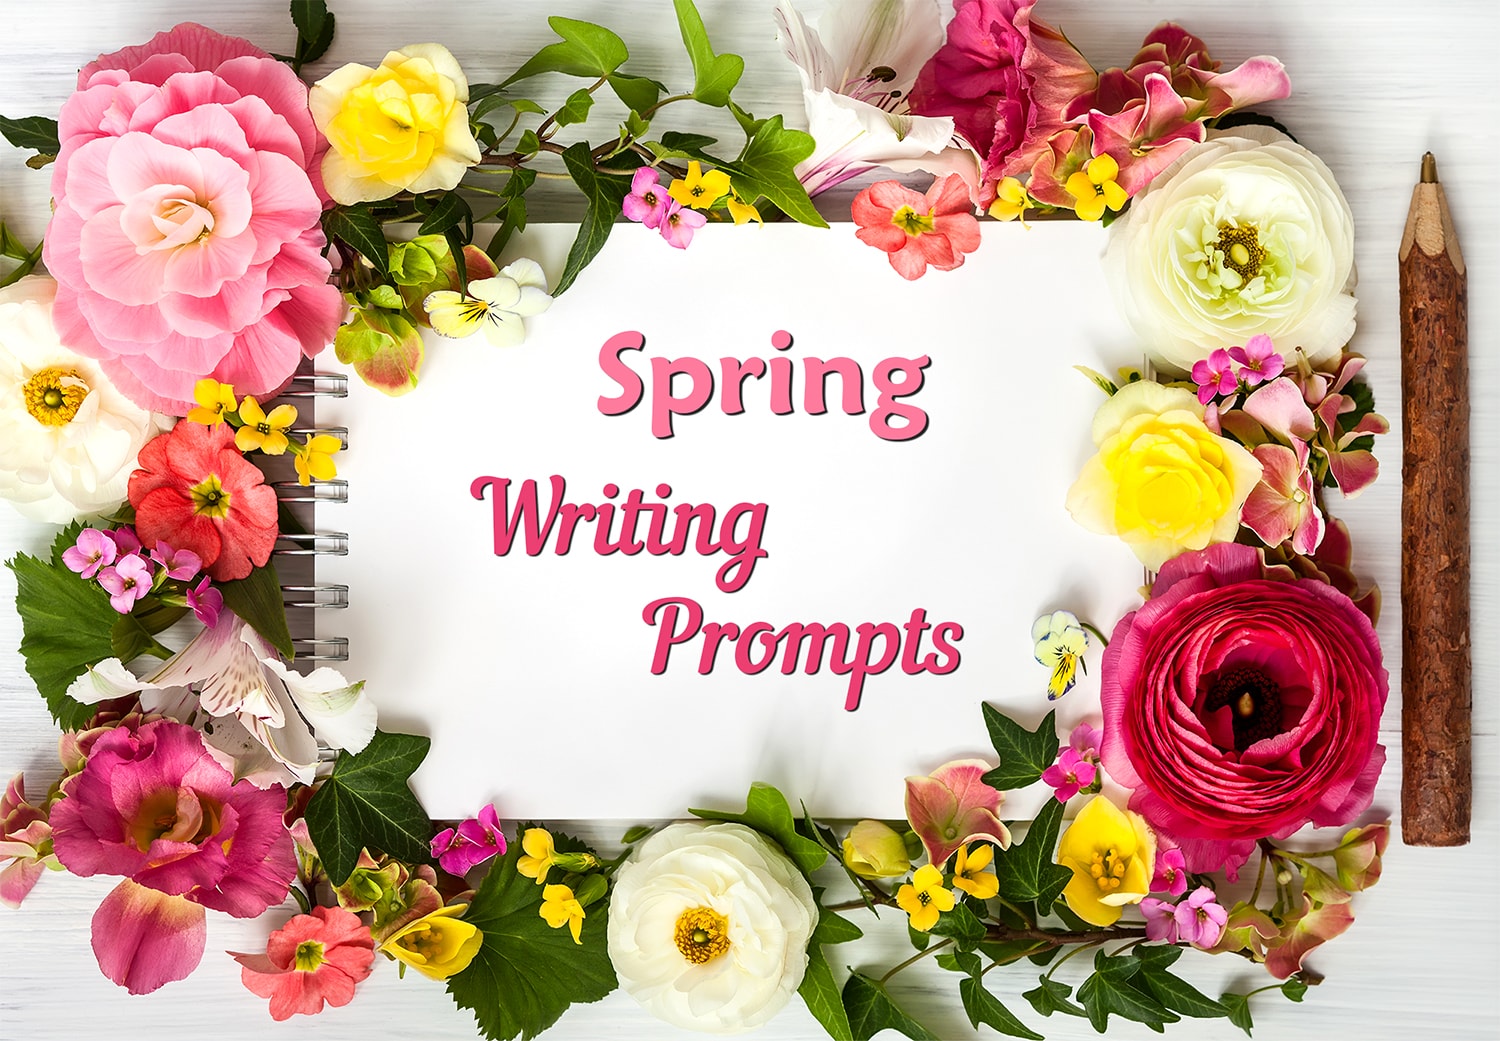 Creative Writing Prompts!